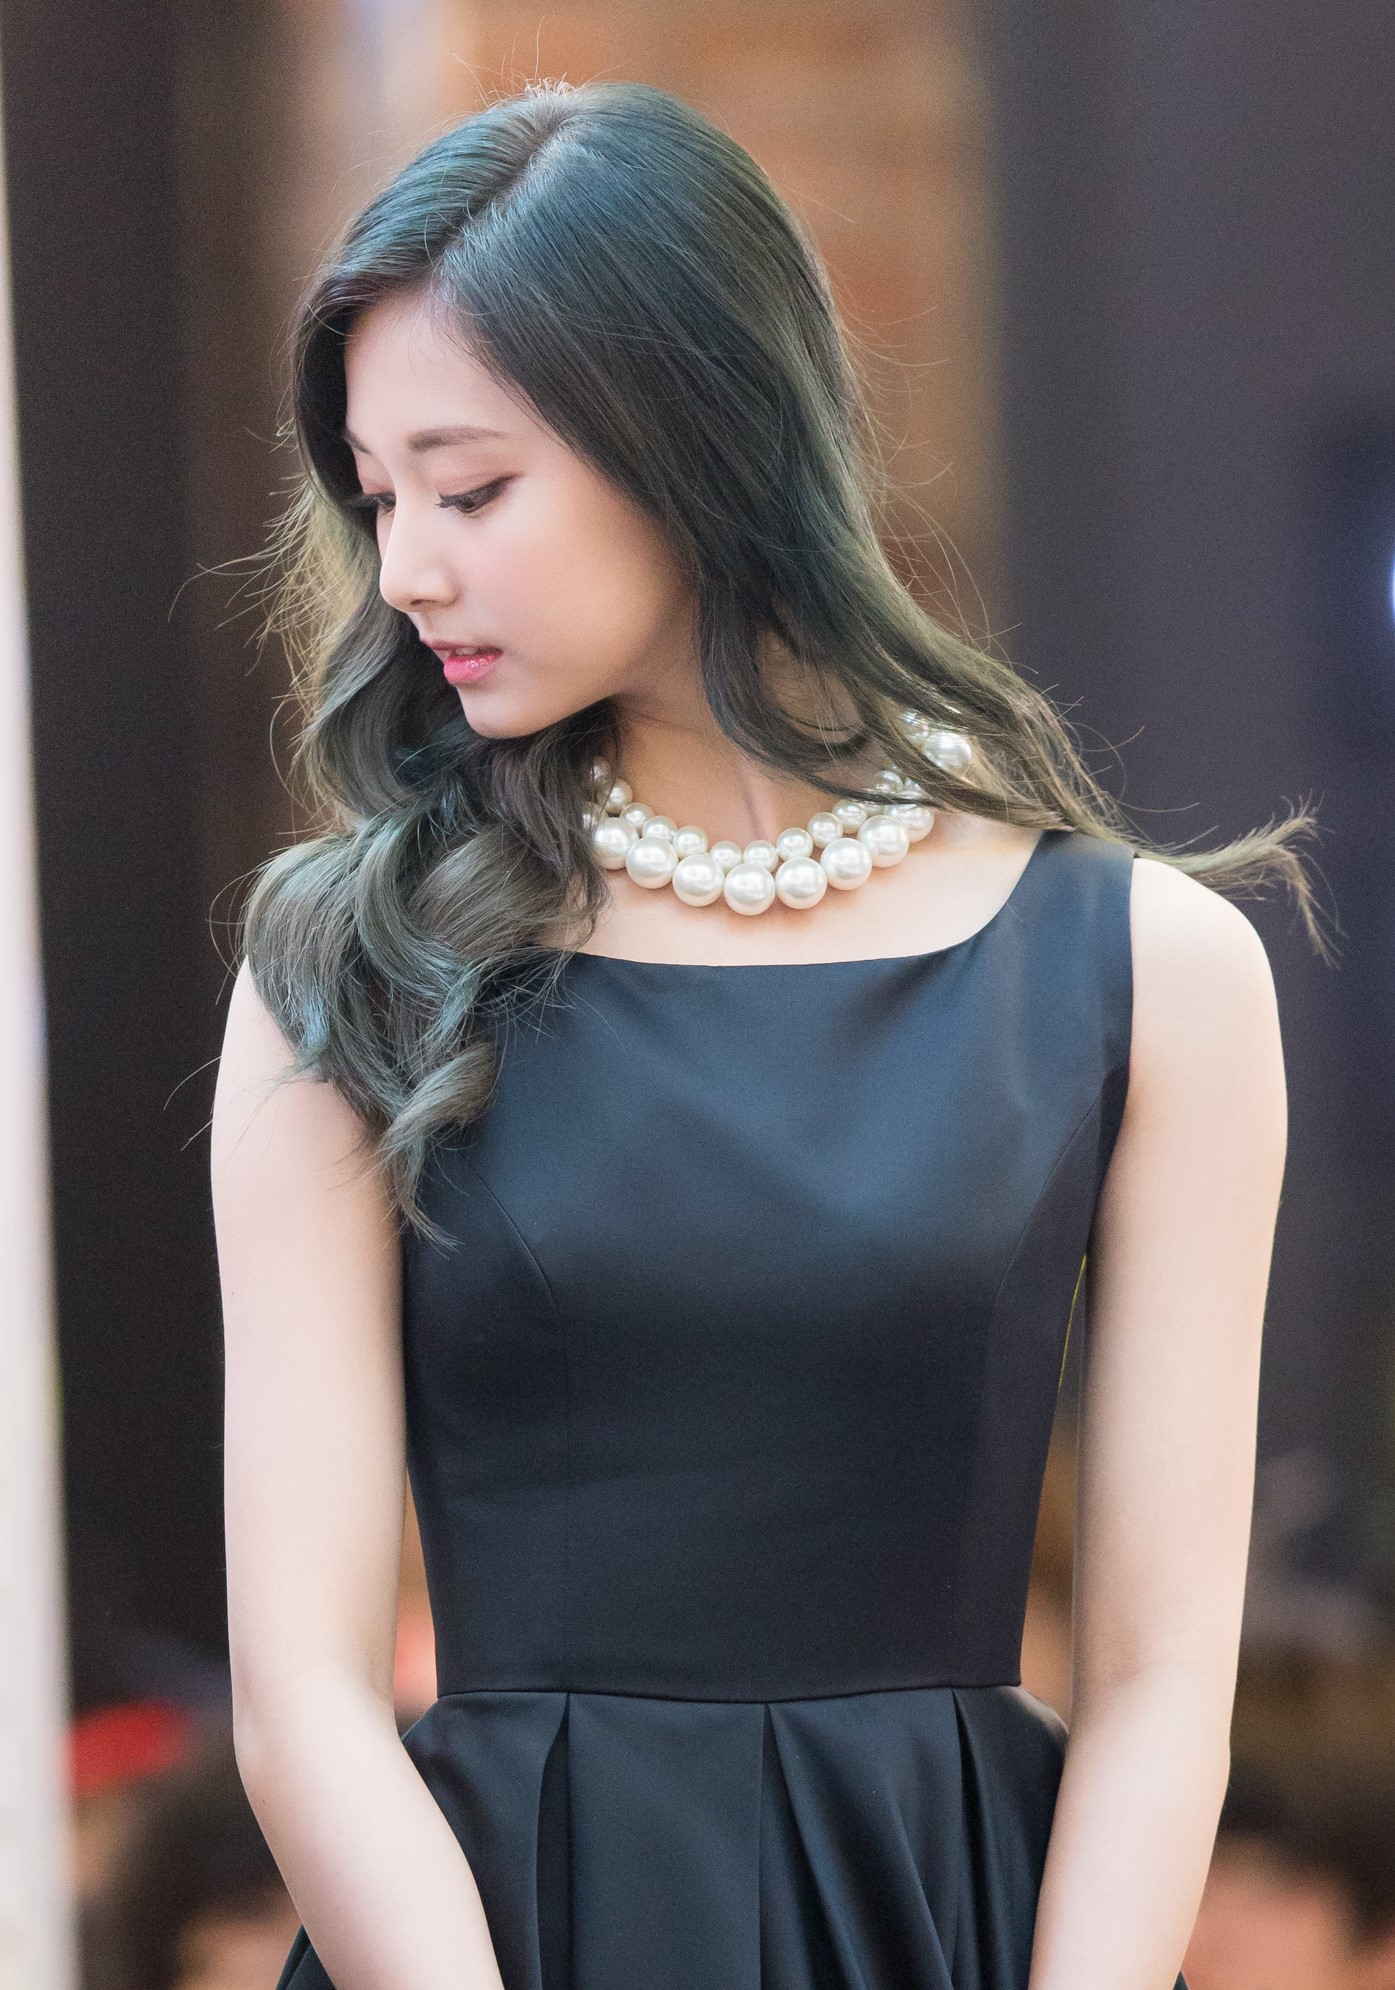 (2016-05-14) Twice Tzuyu in Black Dress  Page Two 4th Fansign @ Yeouido IFC Mall (0).jpg